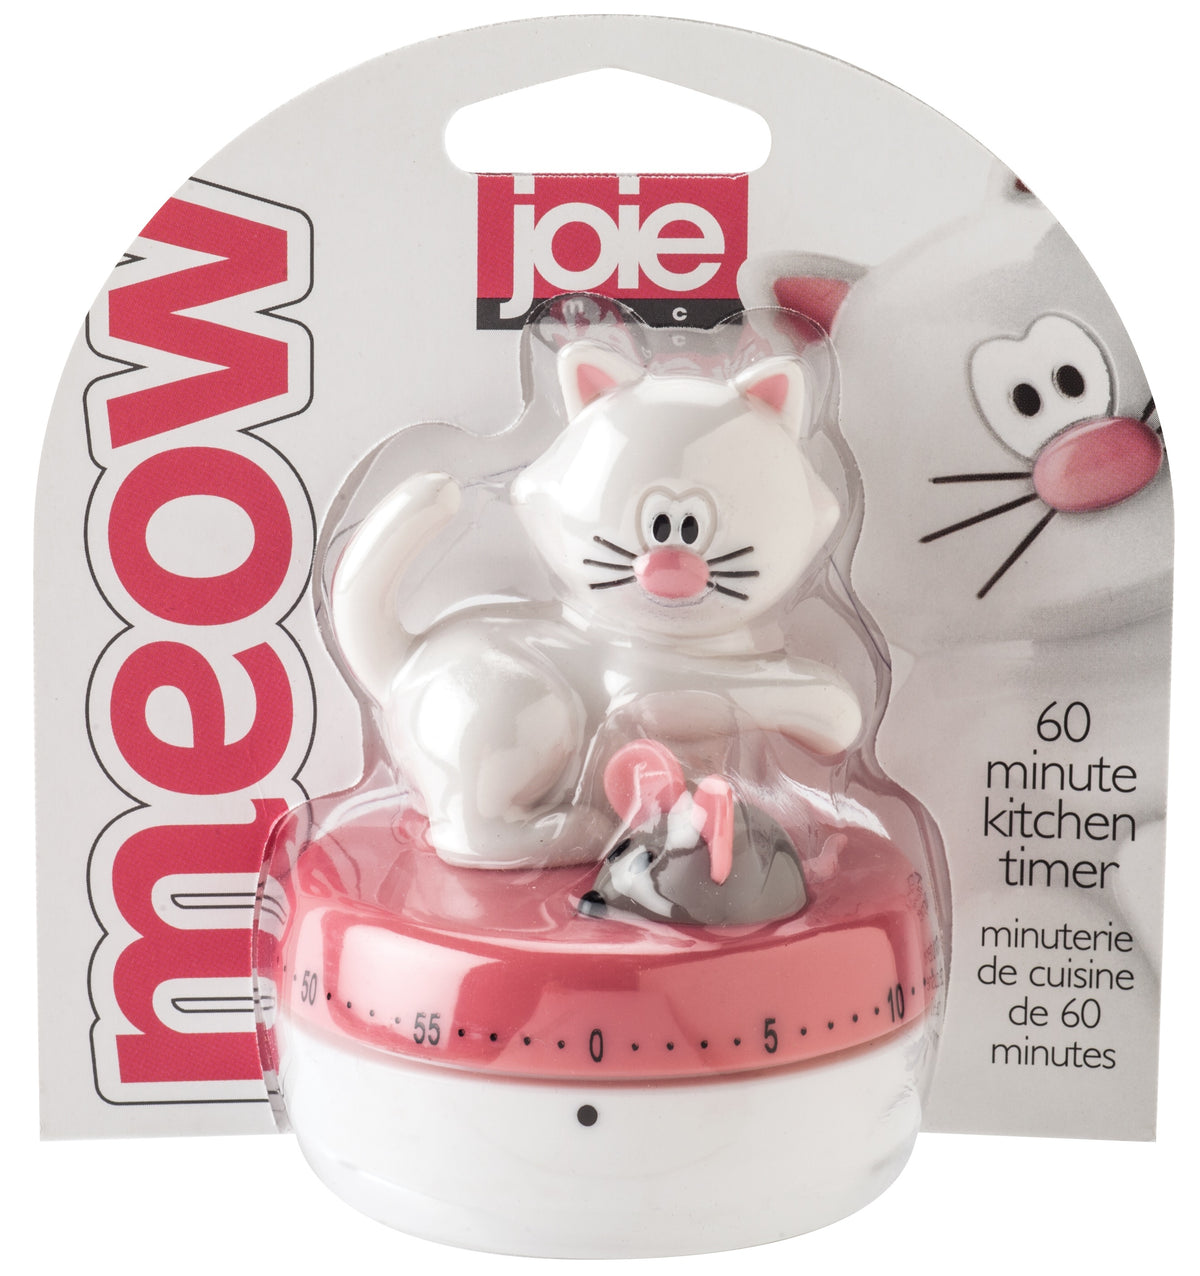 Joie MSC 12444 Meow Kitchen Timer, Assorted Colors